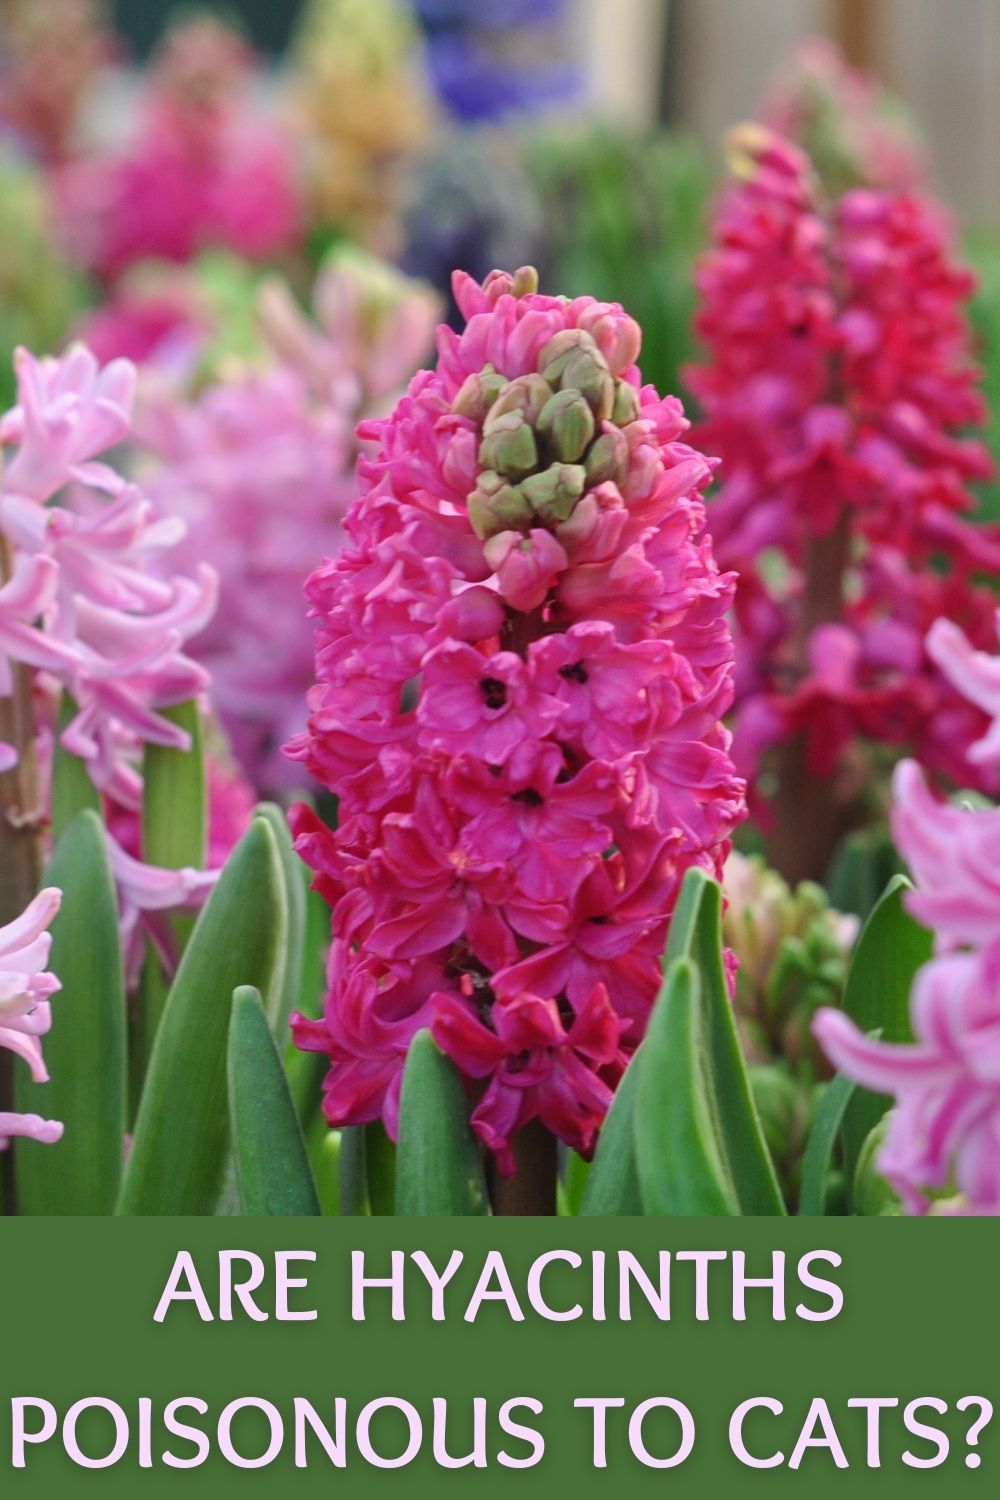 are hyacinths poisonous to cats?